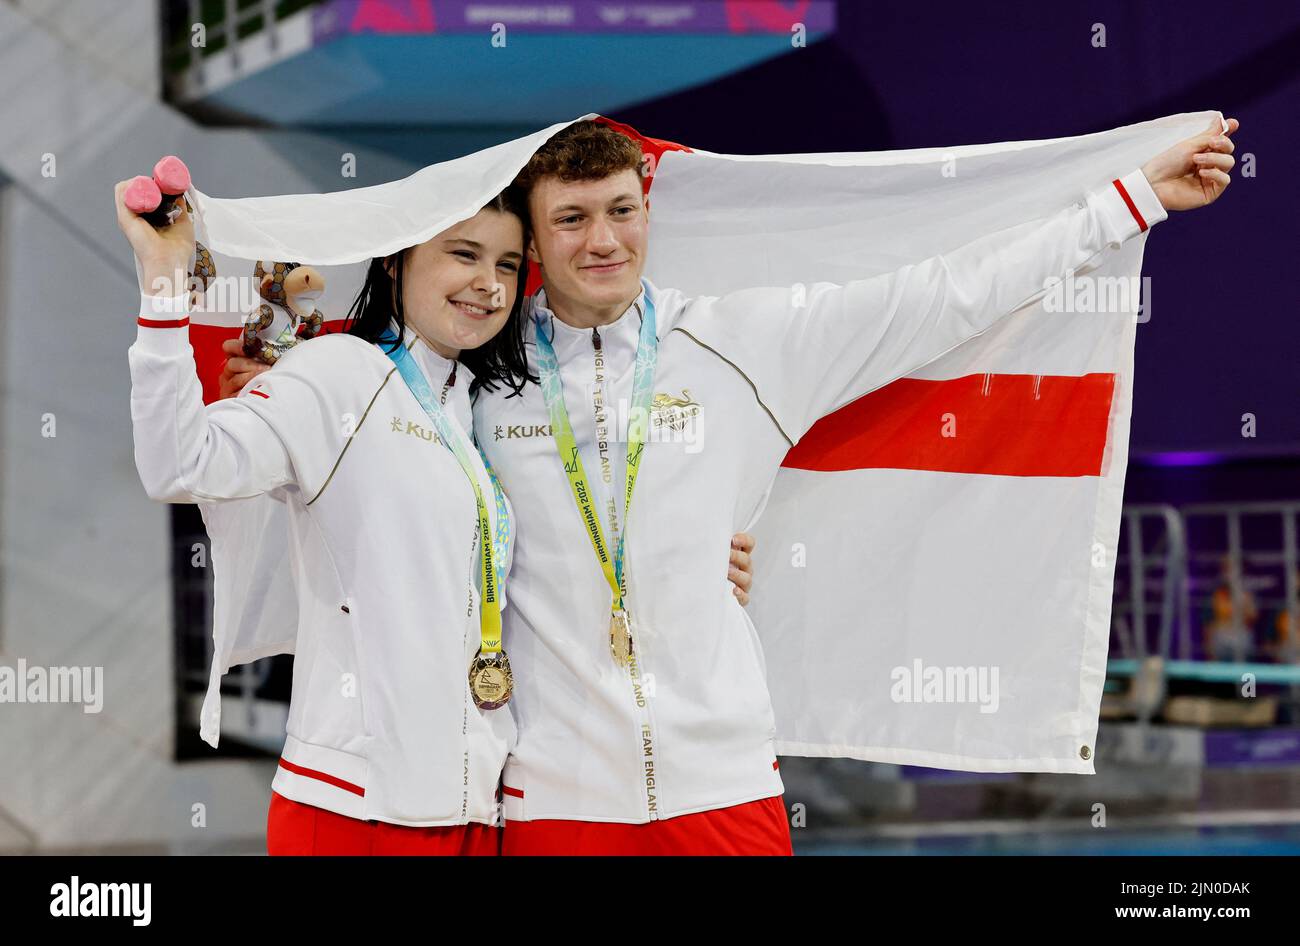 Commonwealth Games - Diving - Mixed Synchronised 10m Platform - Medal Ceremony - Sandwell Aquatics Centre, Birmingham, Britain - August 8, 2022 Gold medallists England's Andrea Spendolini Sirieix and Noah Oliver Williams celebrate on the podium during the medal ceremony REUTERS/Stefan Wermuth Stock Photo